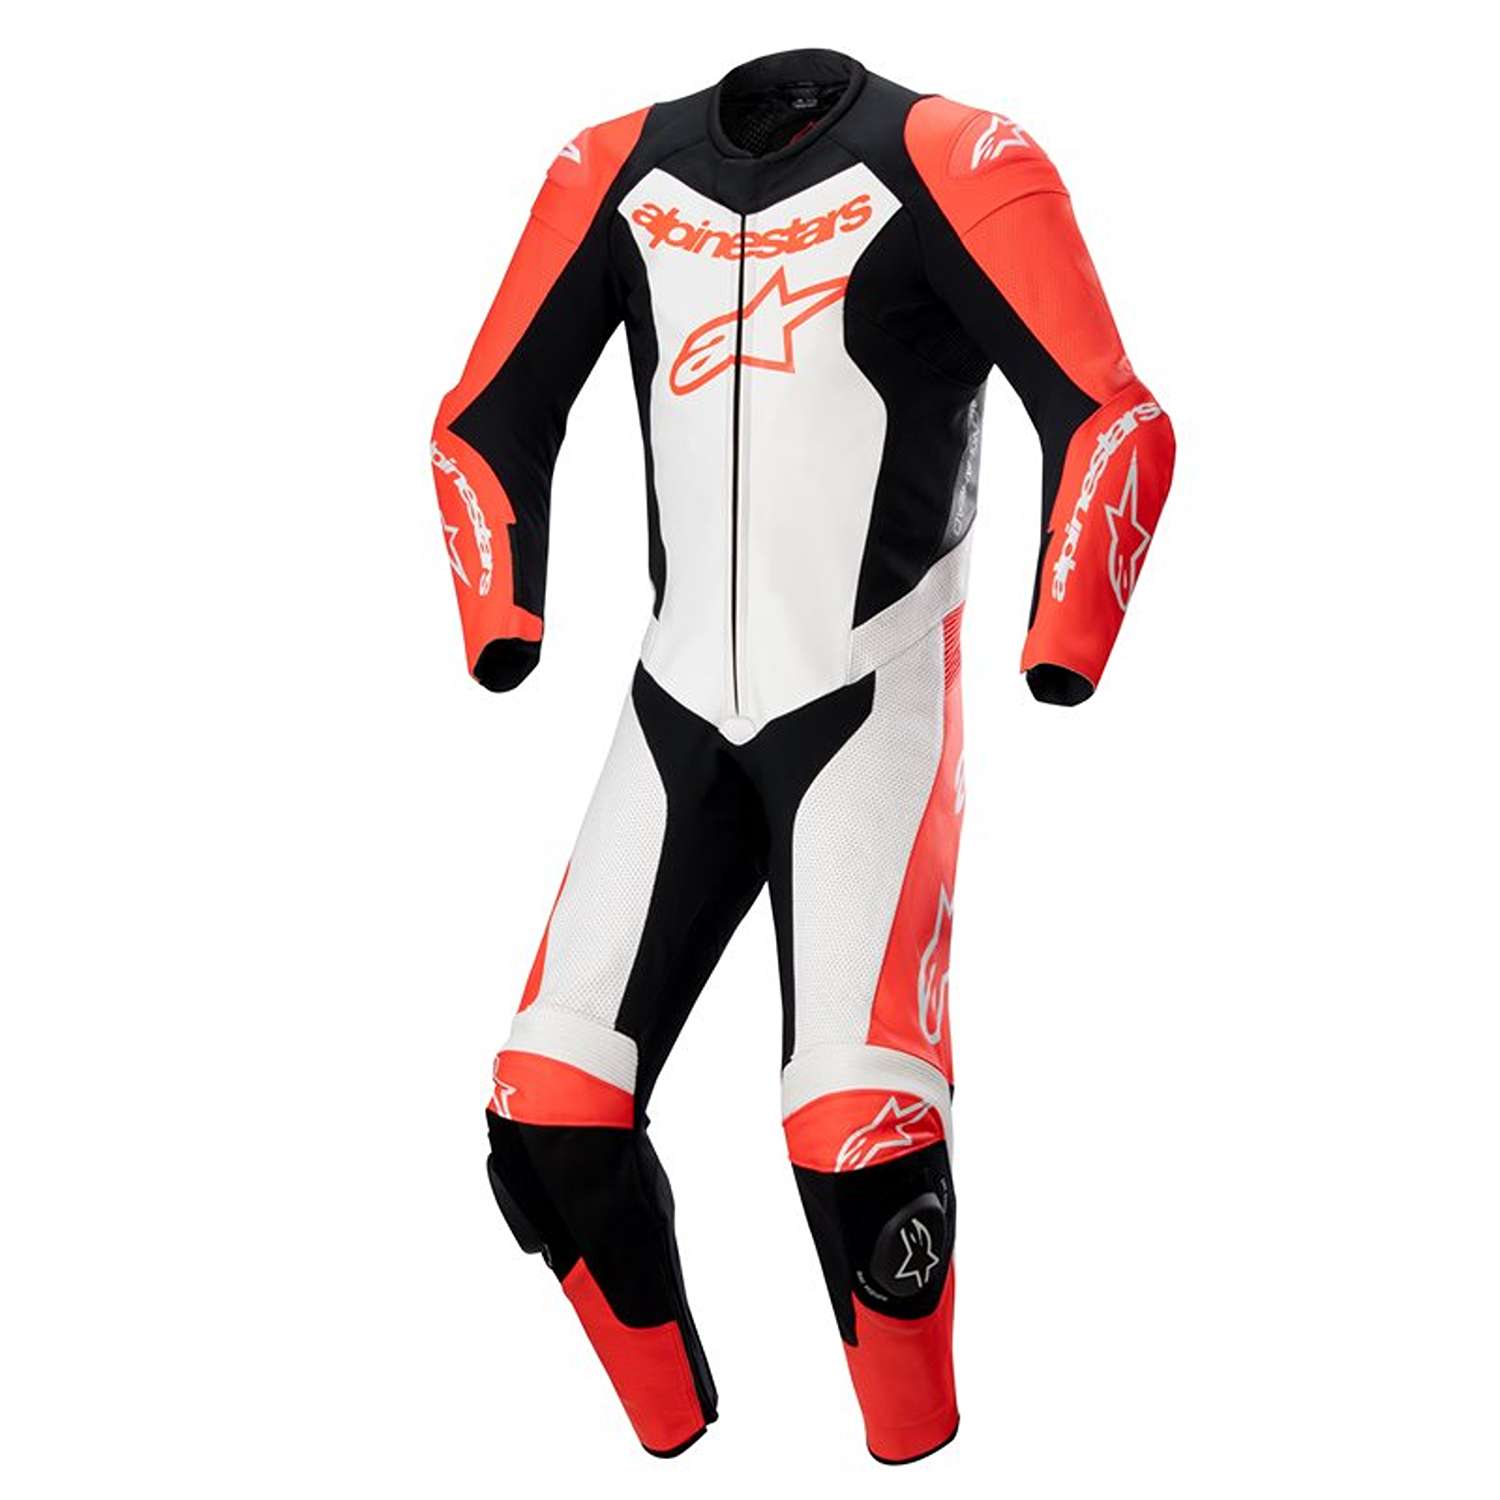 Image of Alpinestars Gp Force Lurv 1Pc Leather Suit Red Fluo White Black Size 50 ID 8059347340371